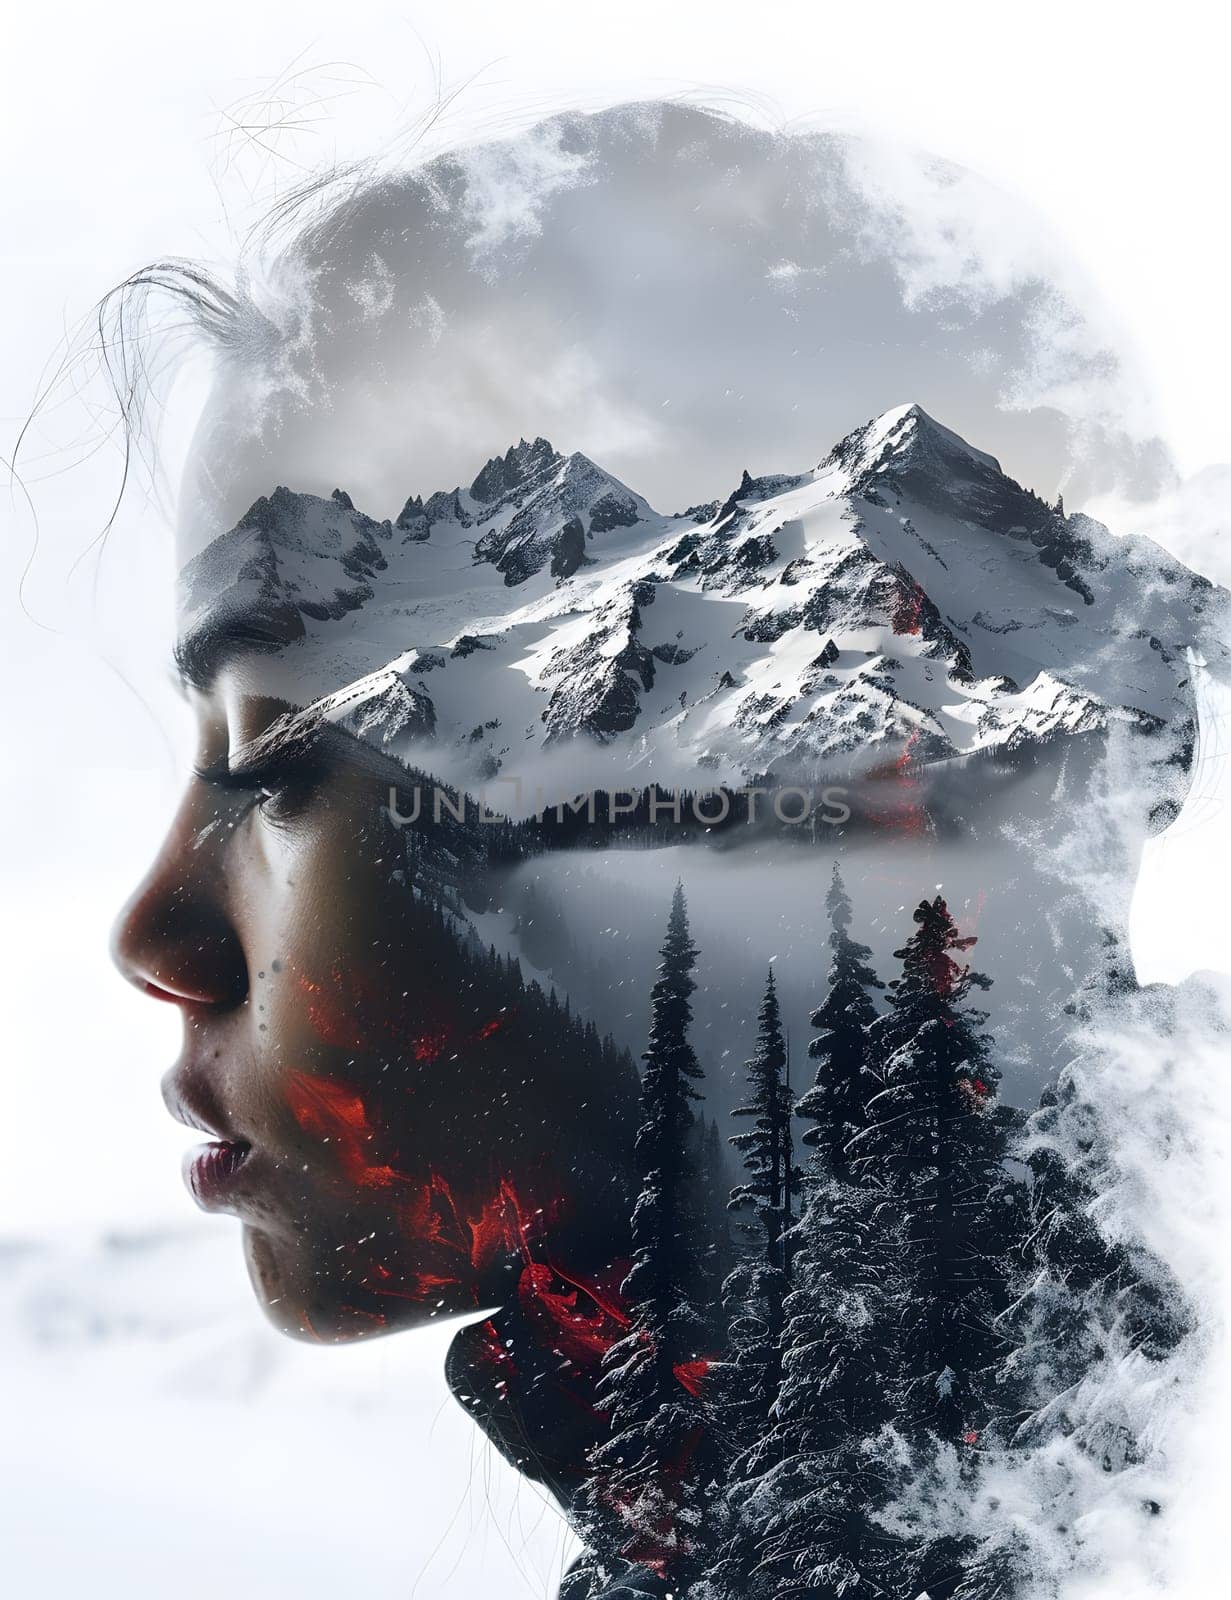 A compelling double exposure of a womans jawline and a majestic snowcapped mountain, showcasing the fusion of art and geological phenomenon in freezing winter settings